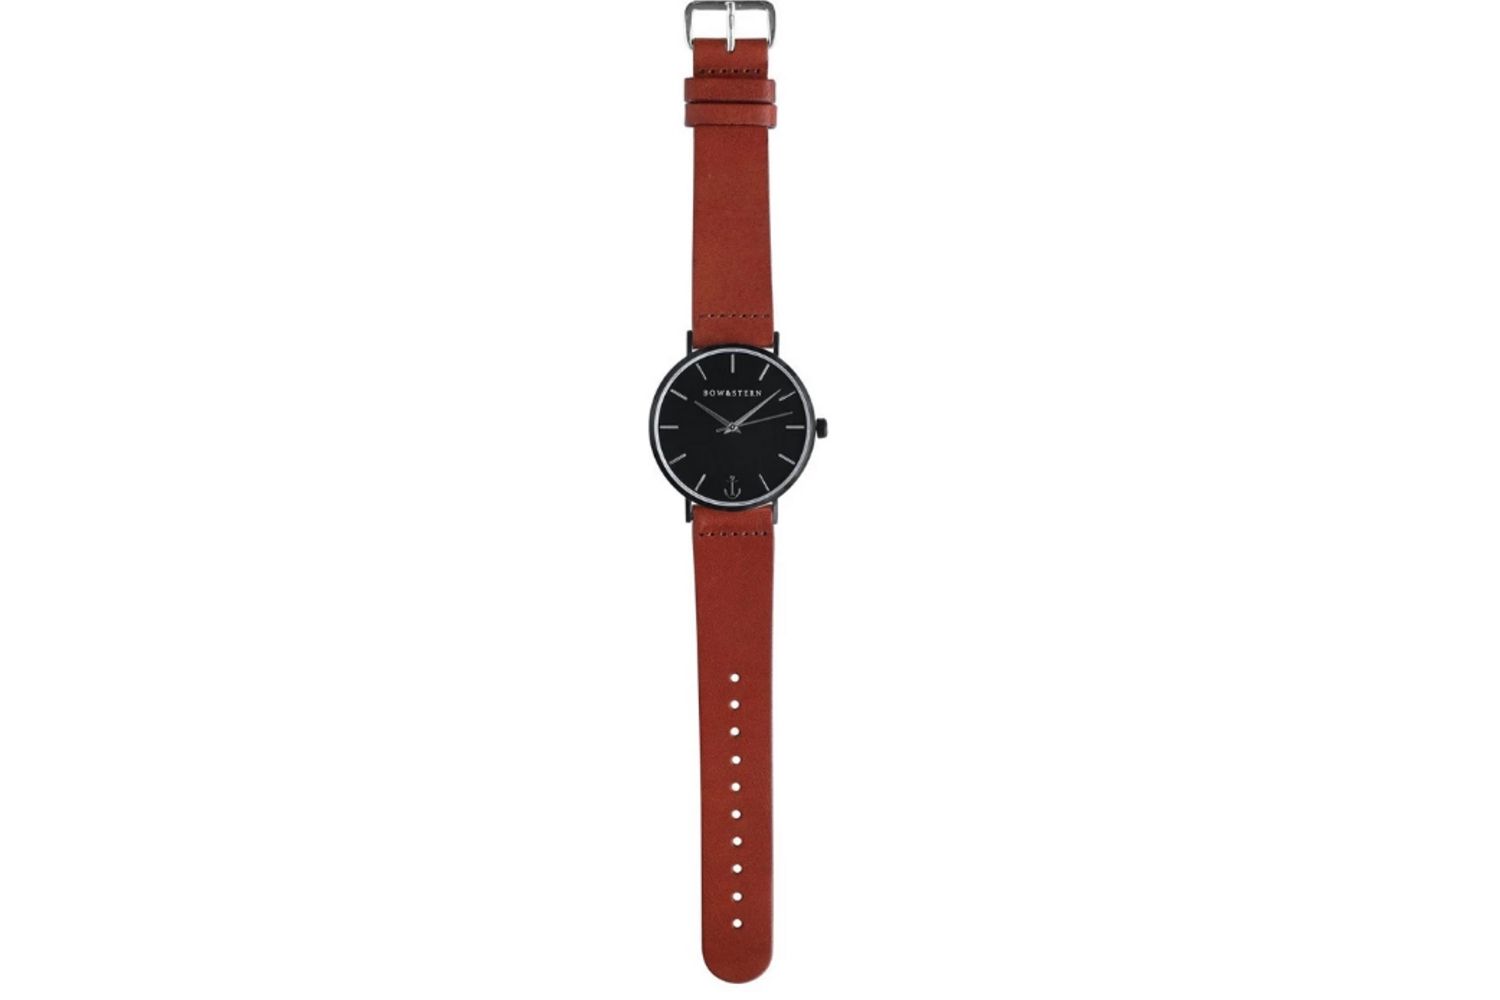 Bow & Stern Castaway - Matte Black and Silver Watch, Brown Leather